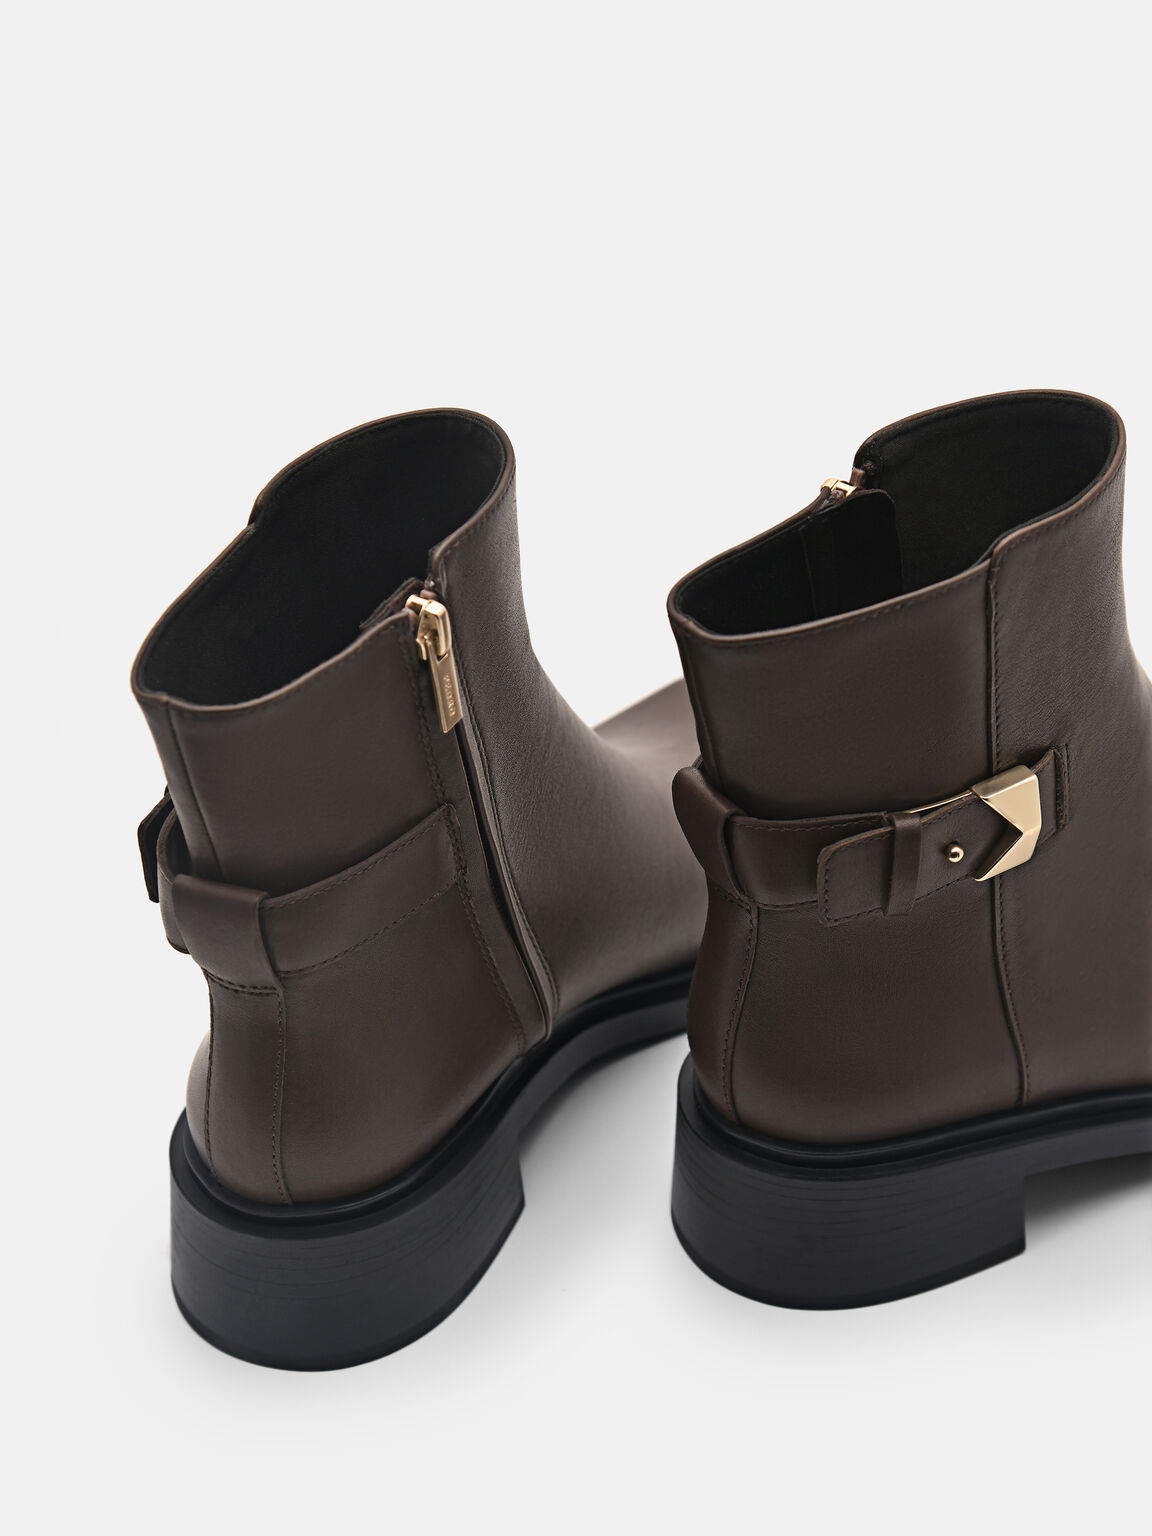 Marion Leather Ankle Boots, Dark Brown